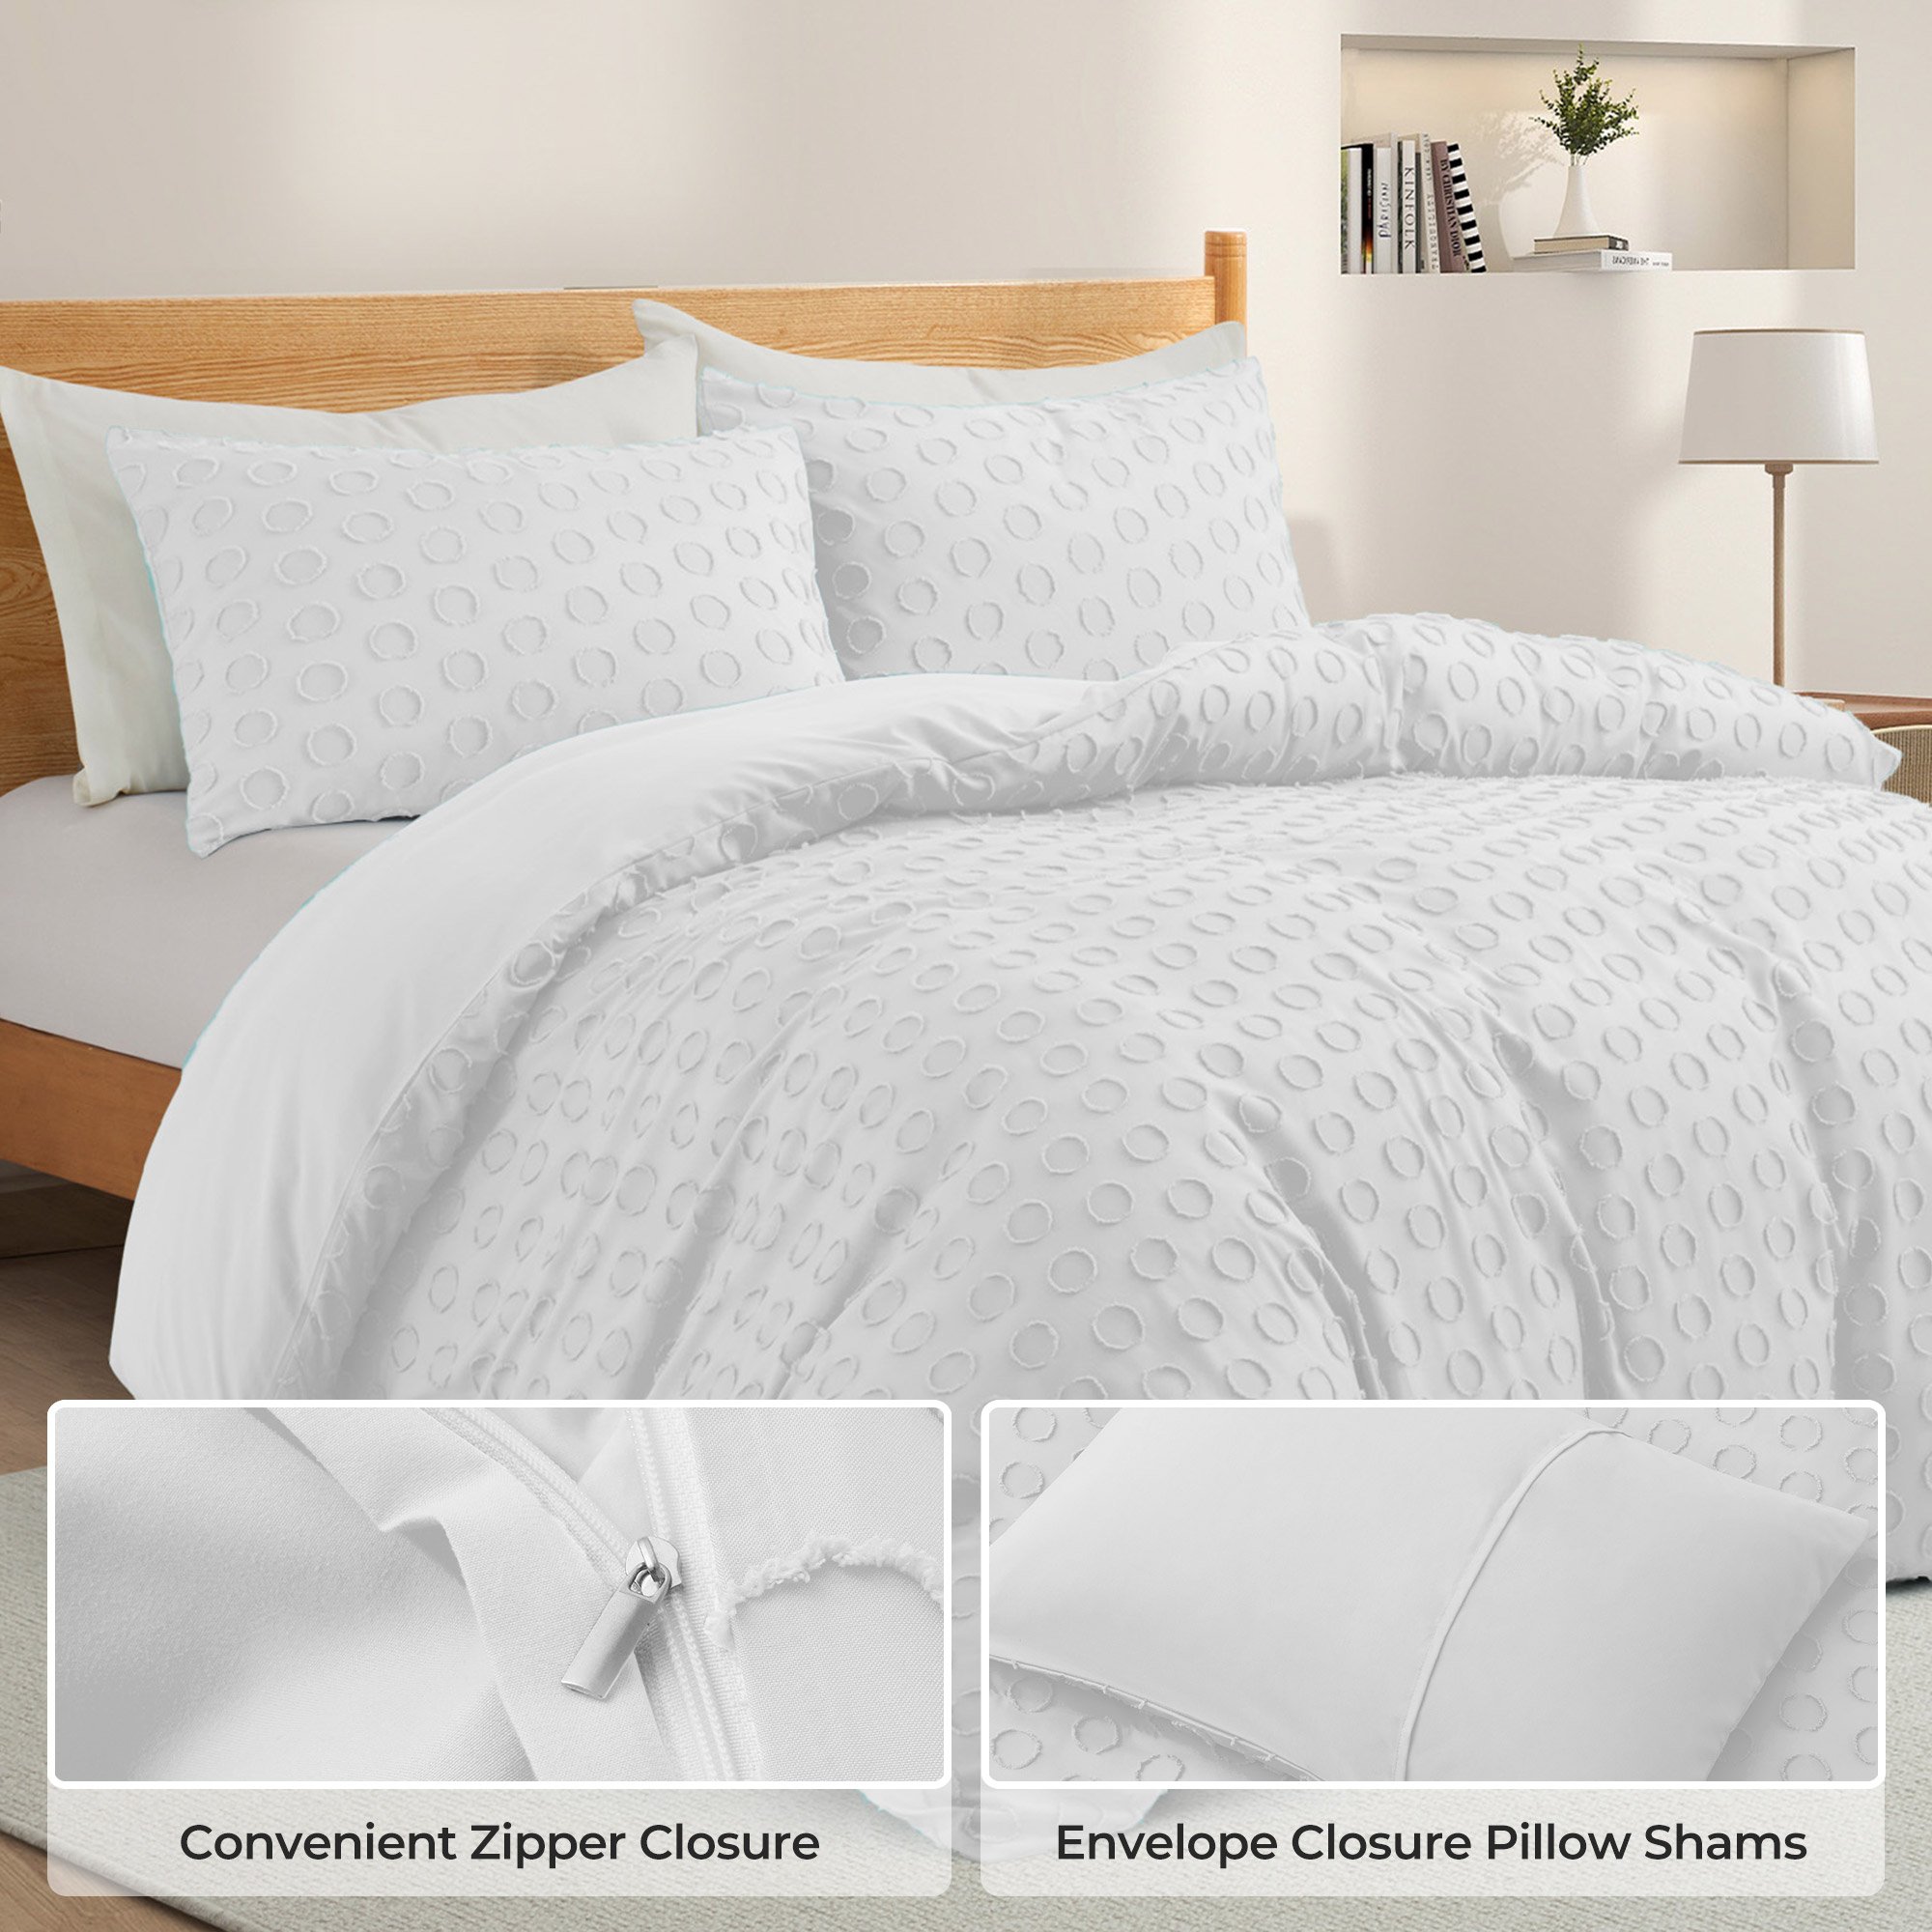 Washed Duvet Cover Set, 2 Or 3 Pieces With Zipper Closure - Twin Size